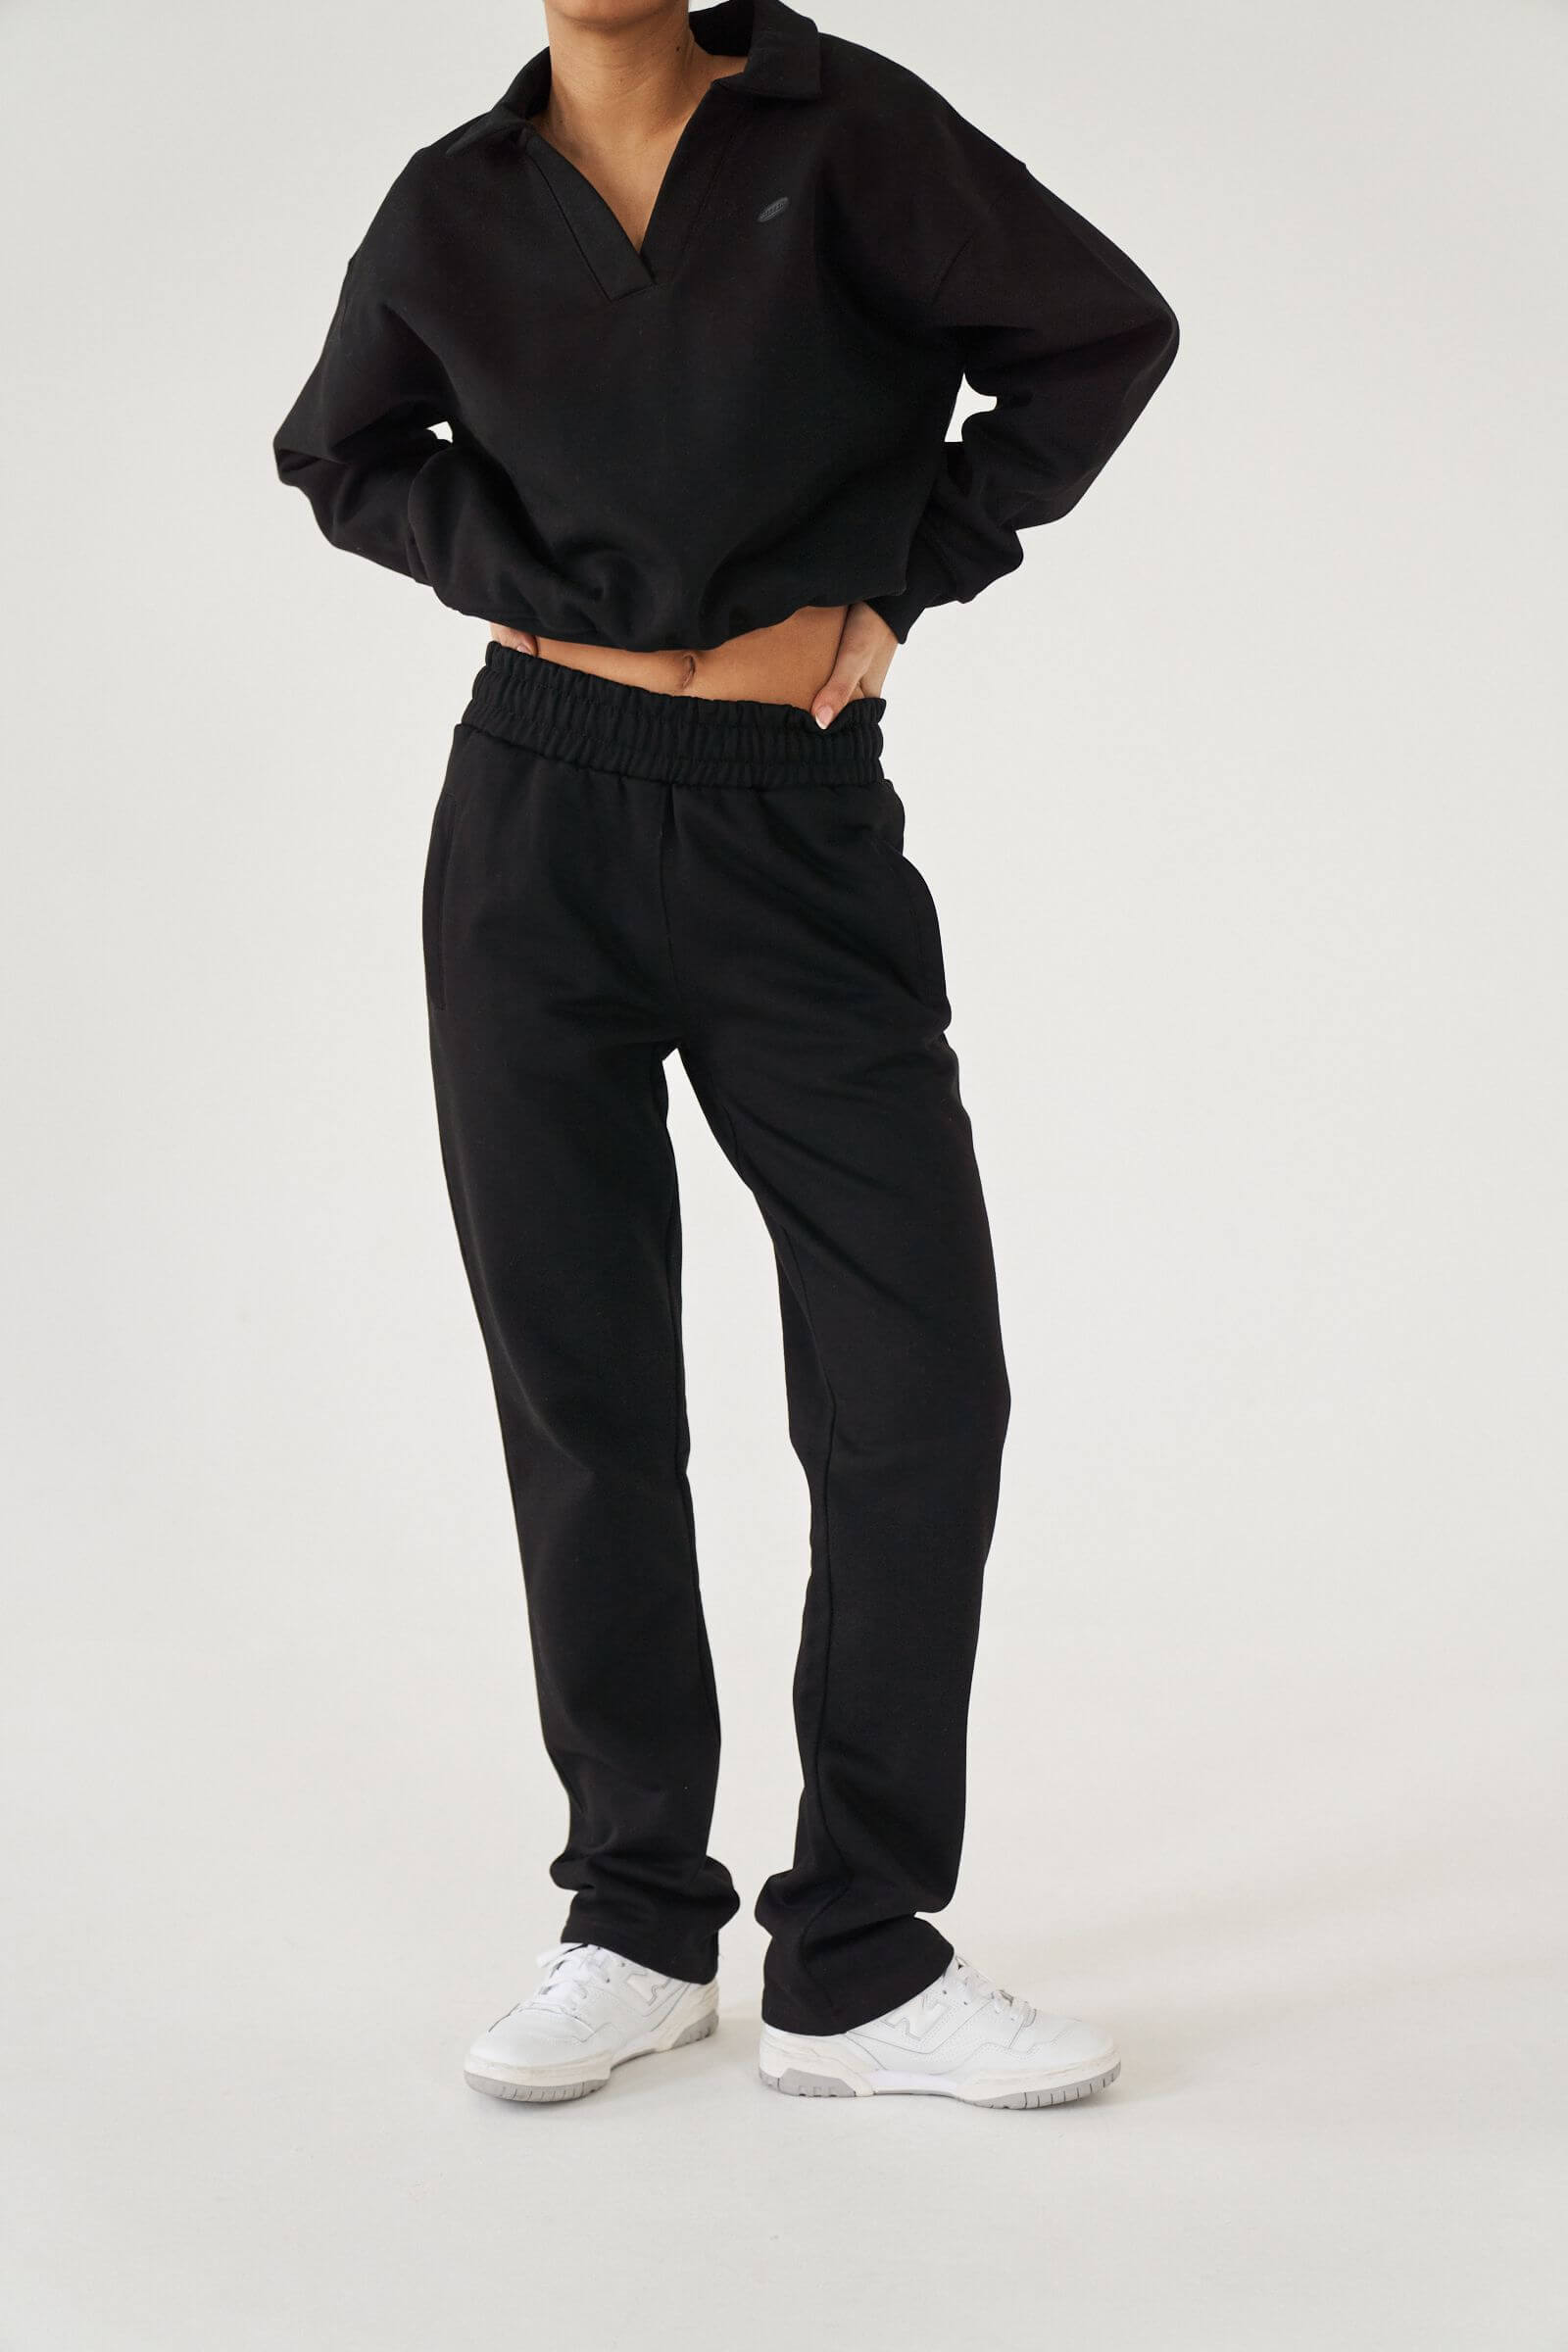 Sister.Stories Straight Leg Joggers In Black at Storm Fashion